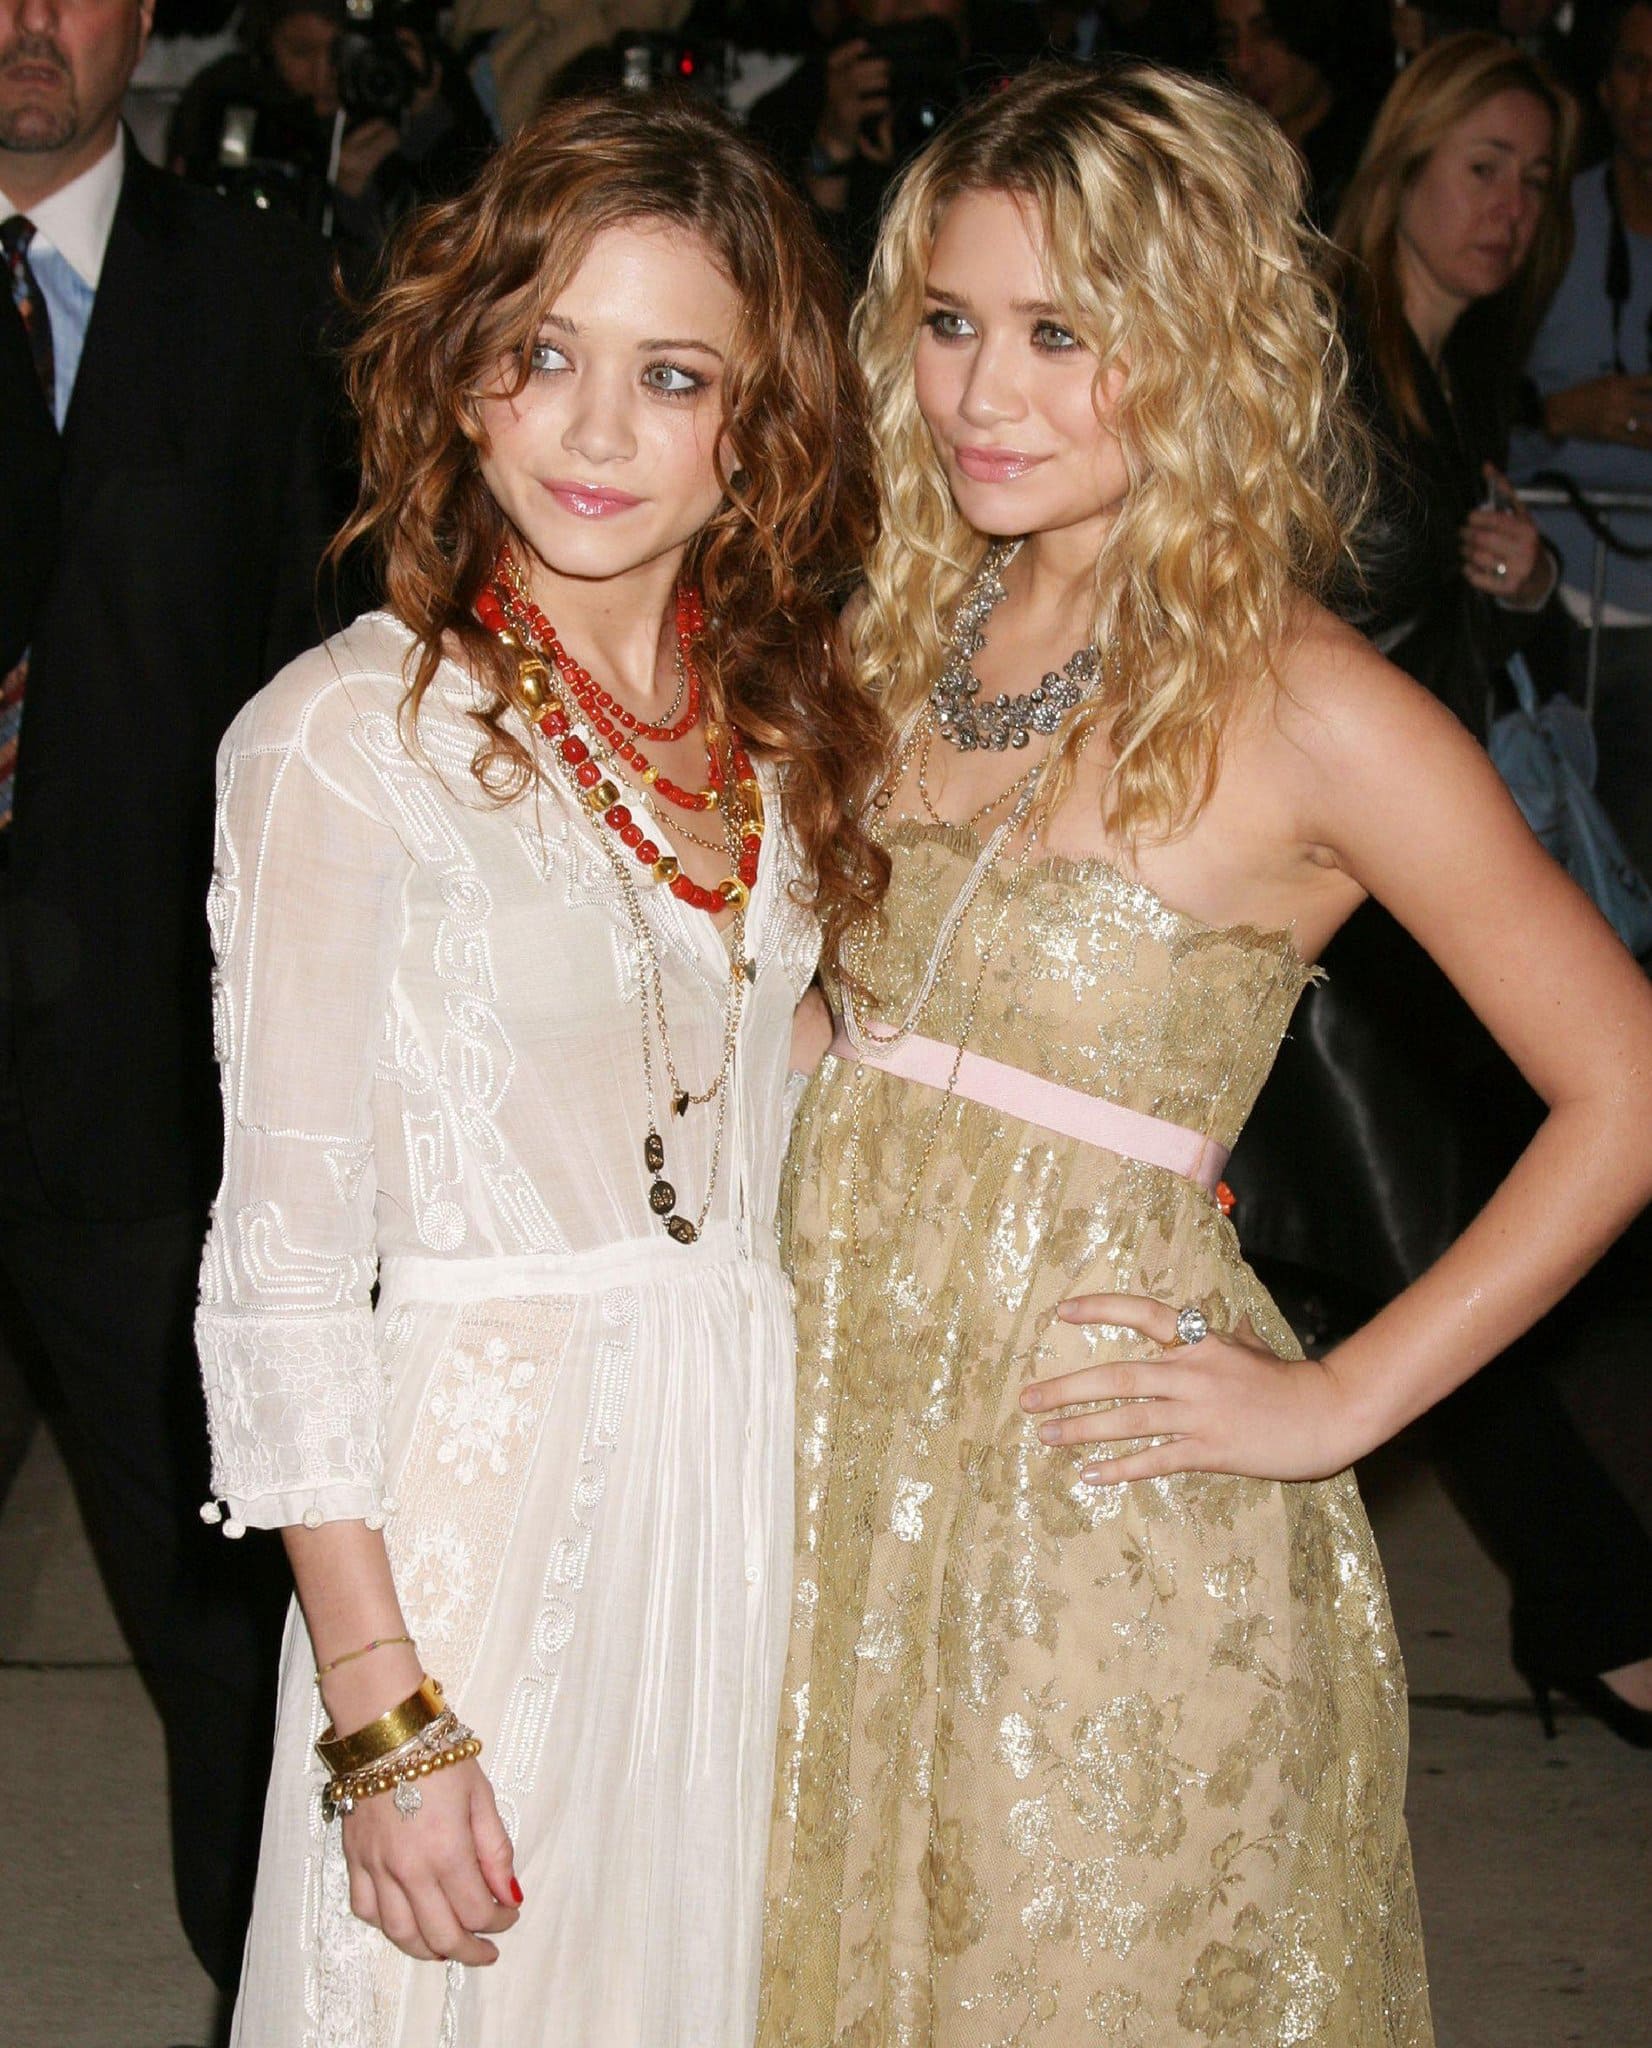 Mary-Kate and Ashley Olsen were reportedly stalked by paparazzi to get a glimpse of the Olsens in real life